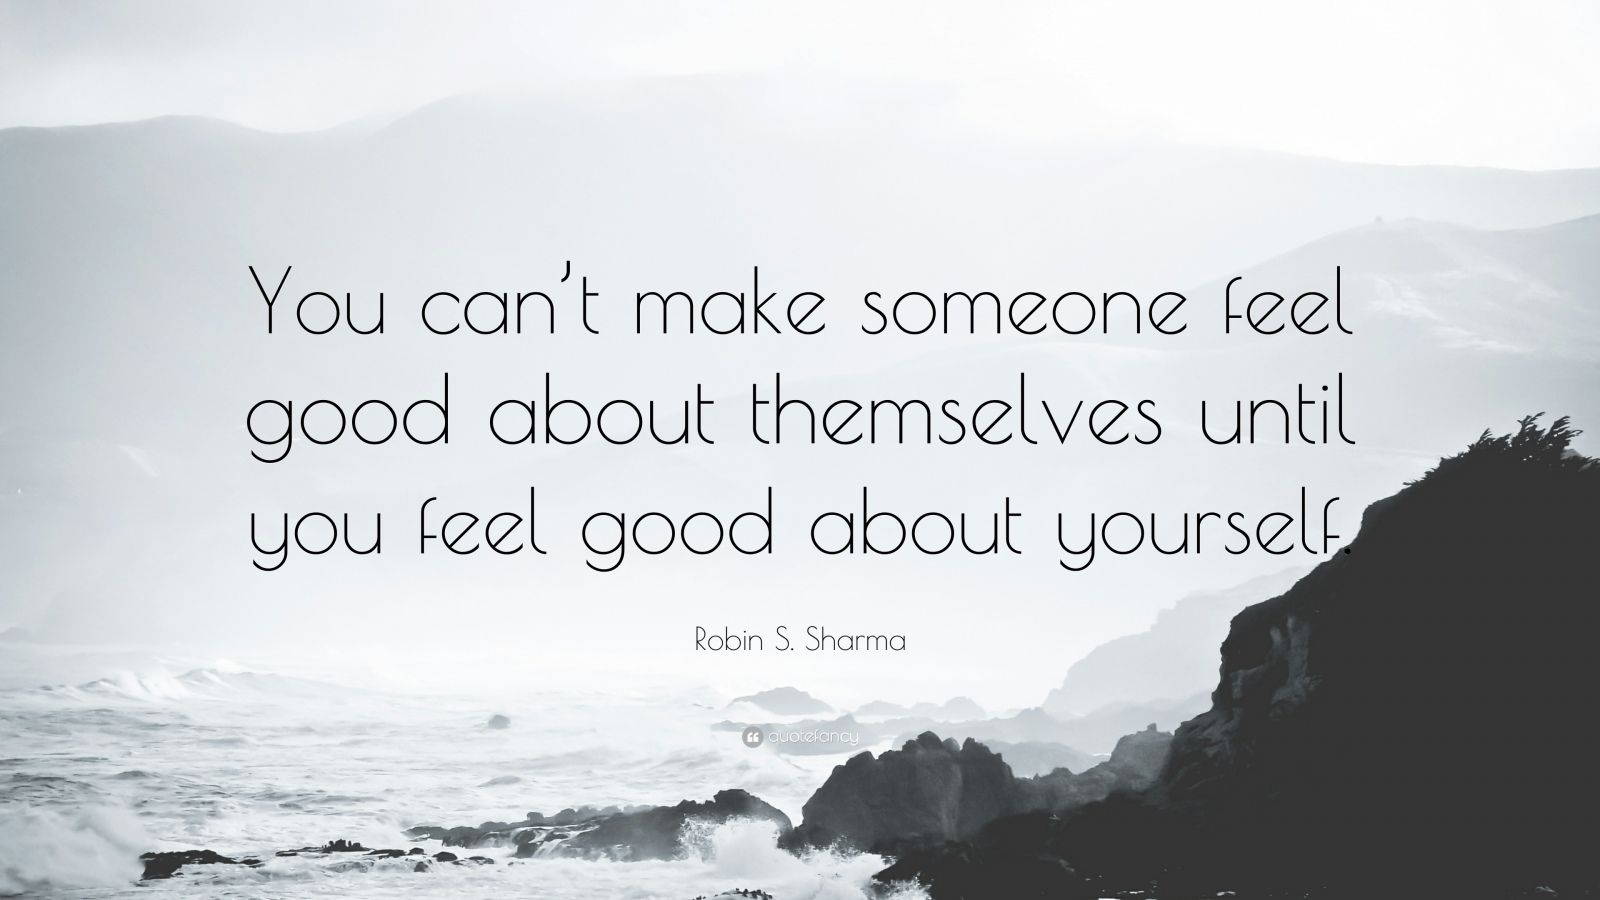 27226 Robin S Sharma Quote You can t make someone feel good about